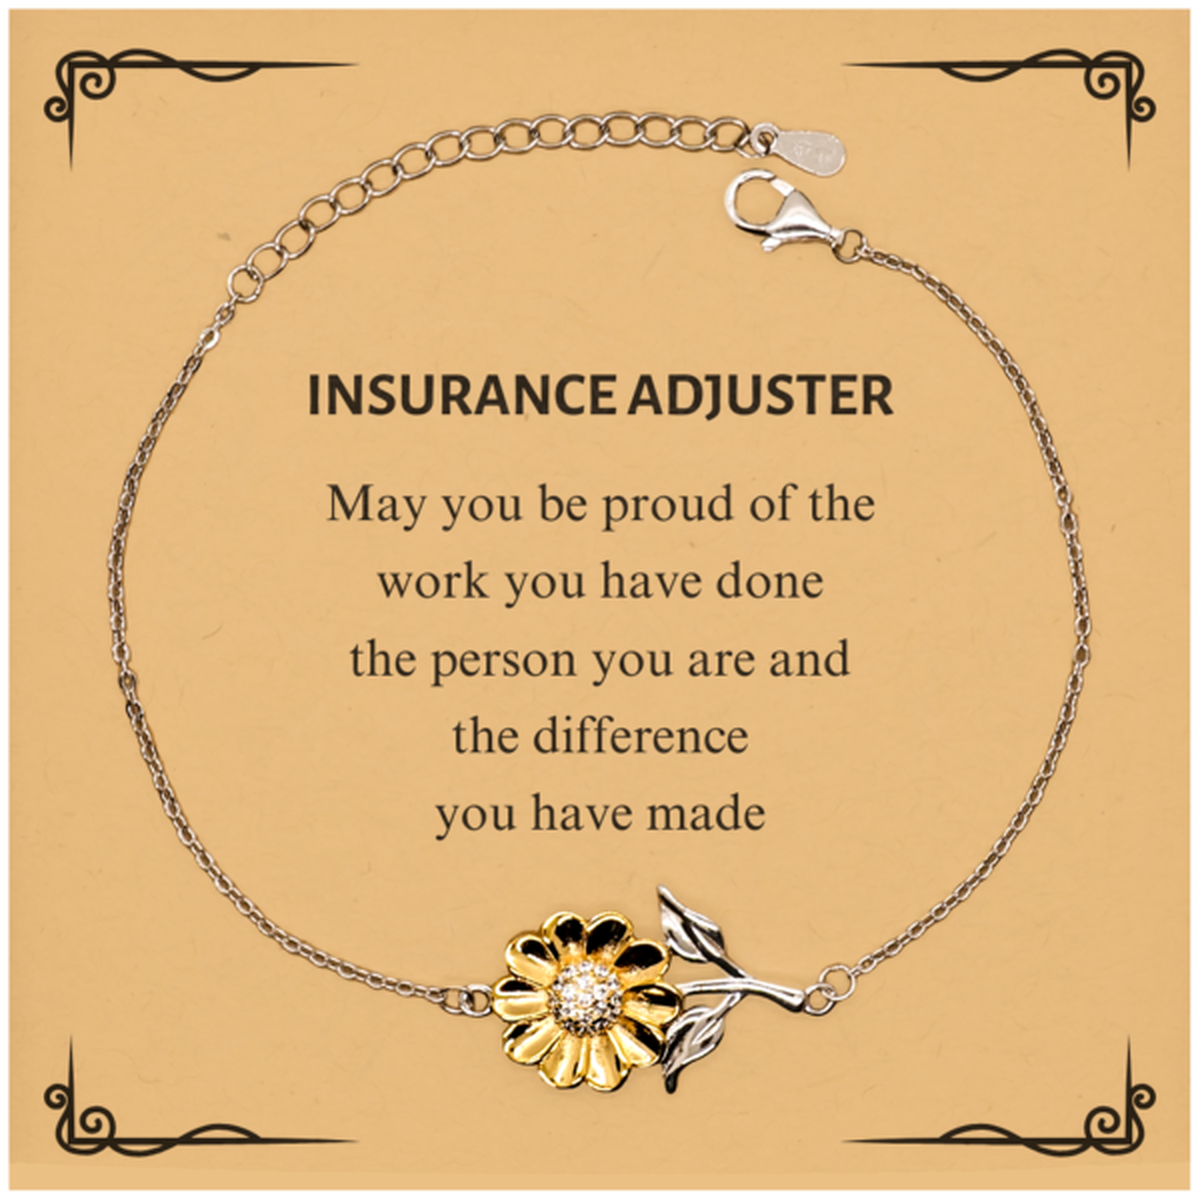 Insurance Adjuster May you be proud of the work you have done, Retirement Insurance Adjuster Sunflower Bracelet for Colleague Appreciation Gifts Amazing for Insurance Adjuster